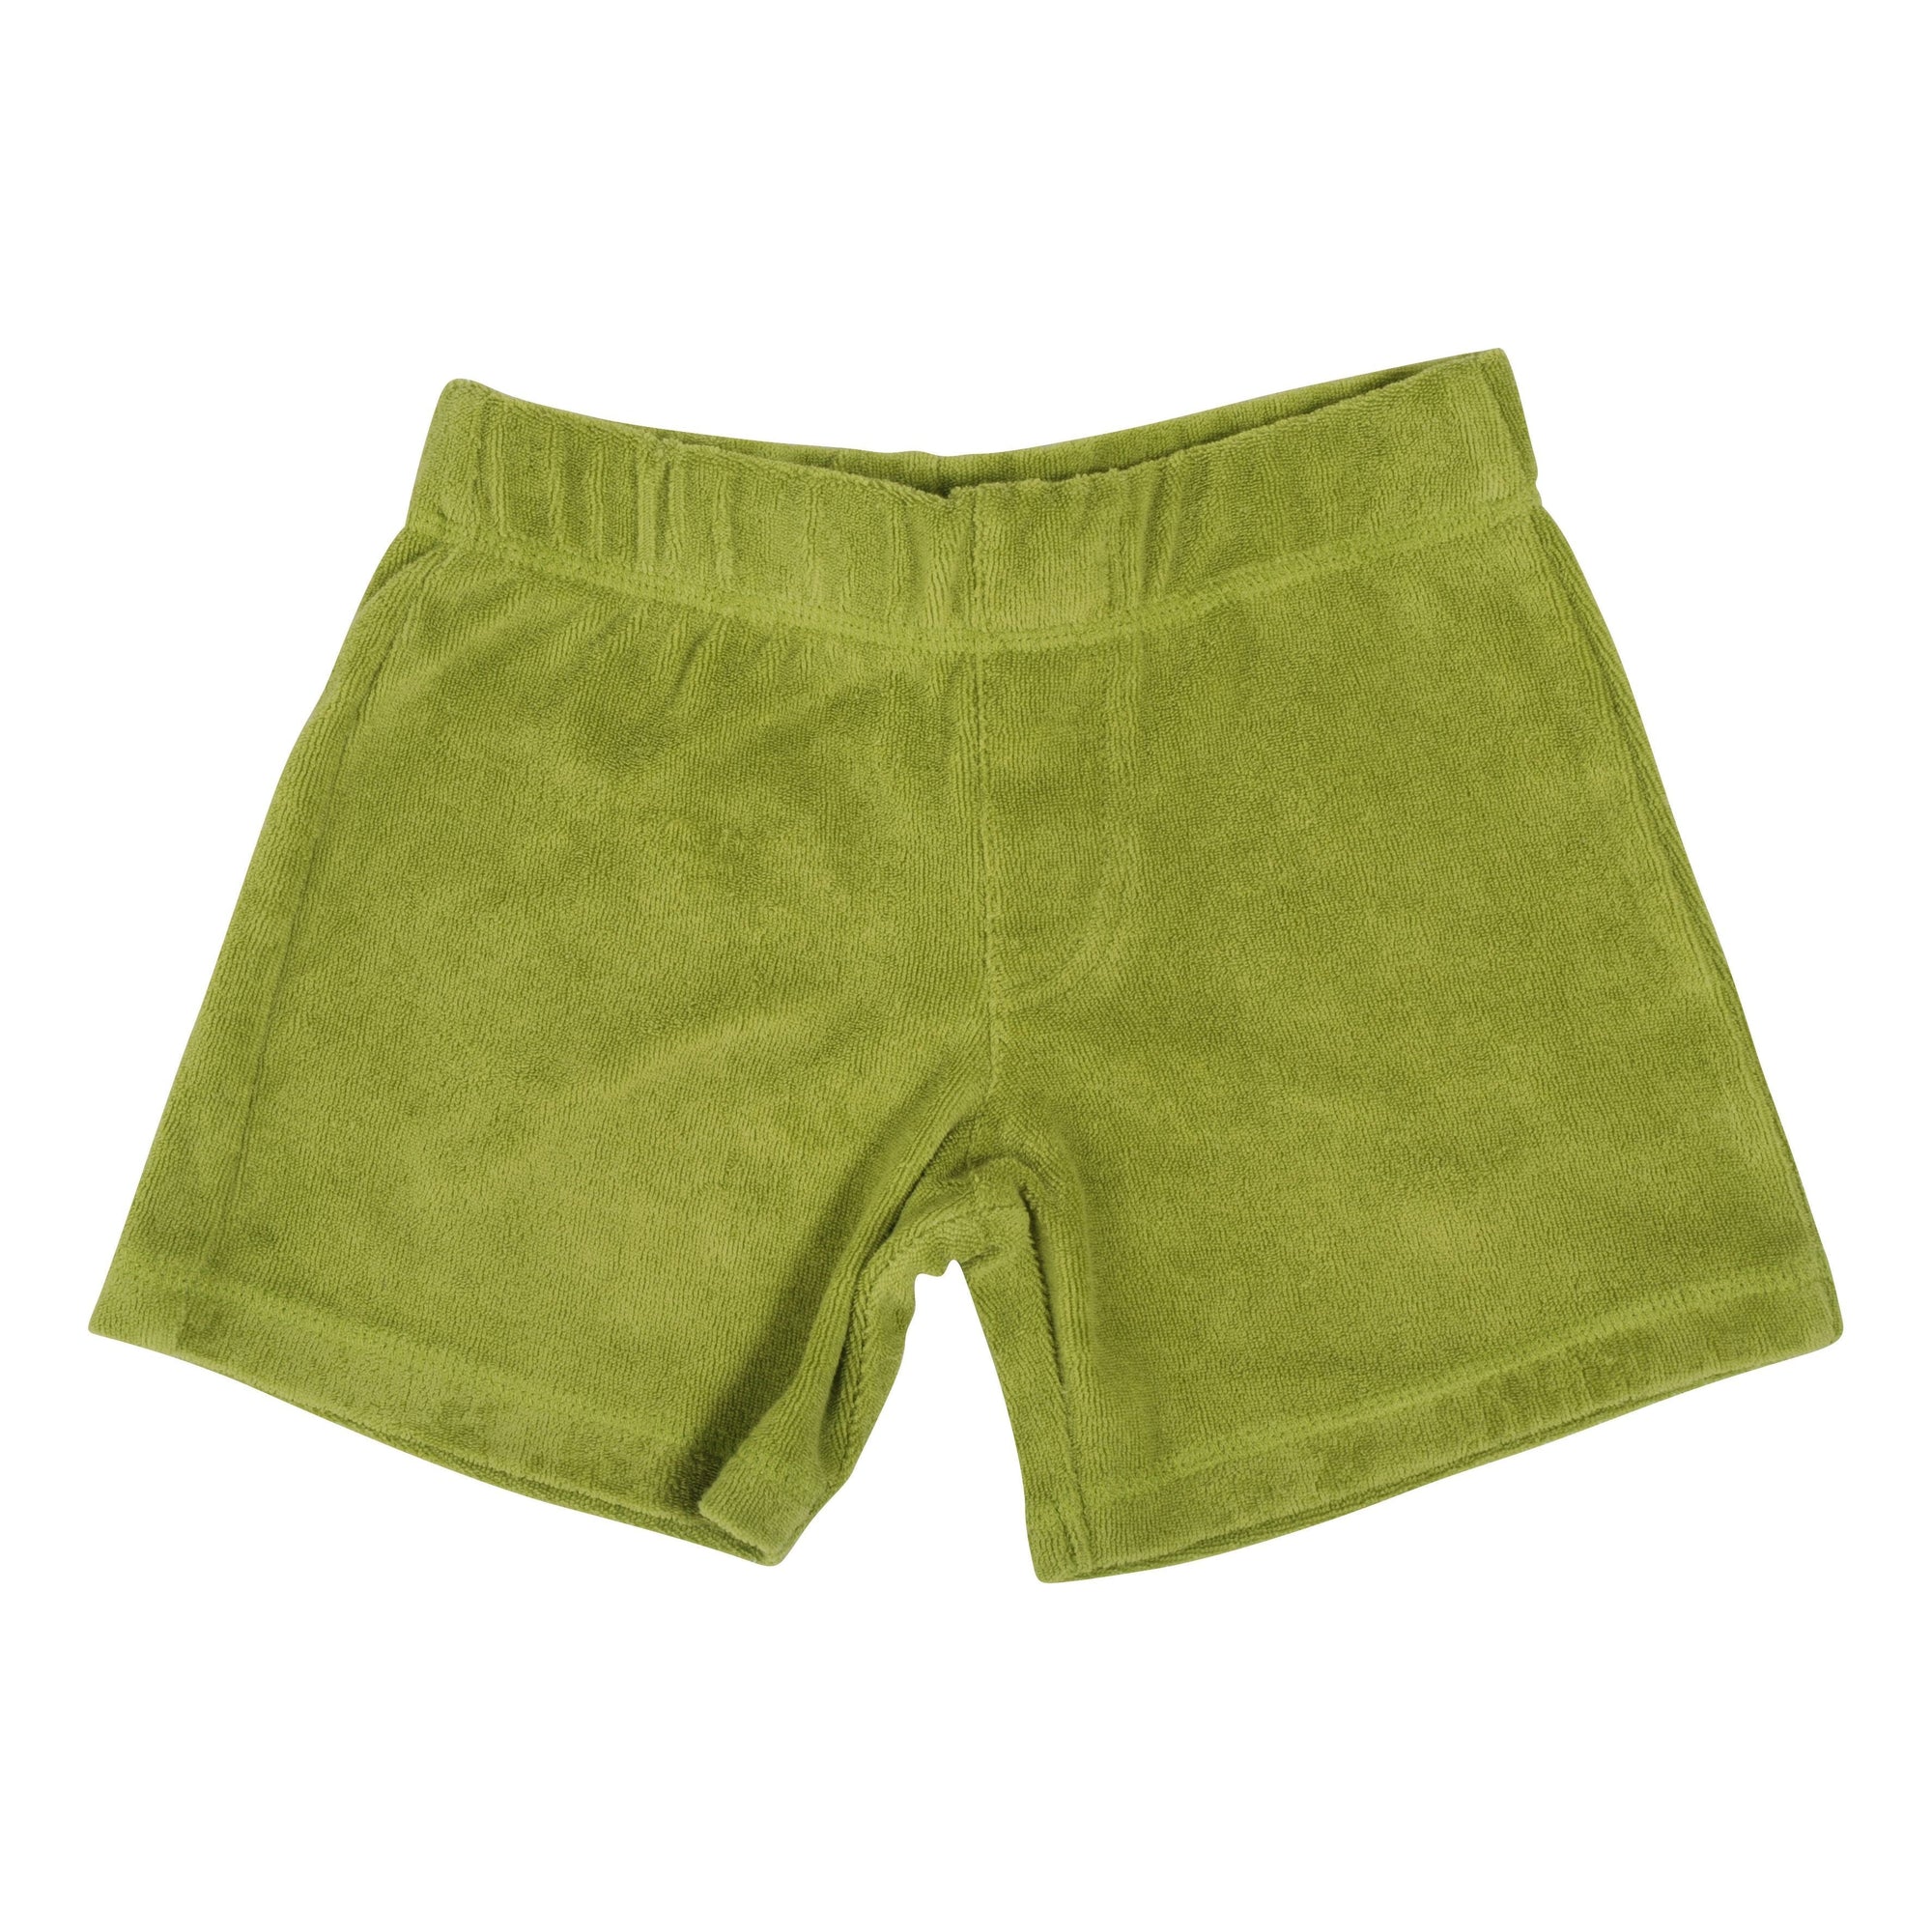 Spinach Green Terry Shorts - 2 Left Size 10-12 years-Duns Sweden-Modern Rascals